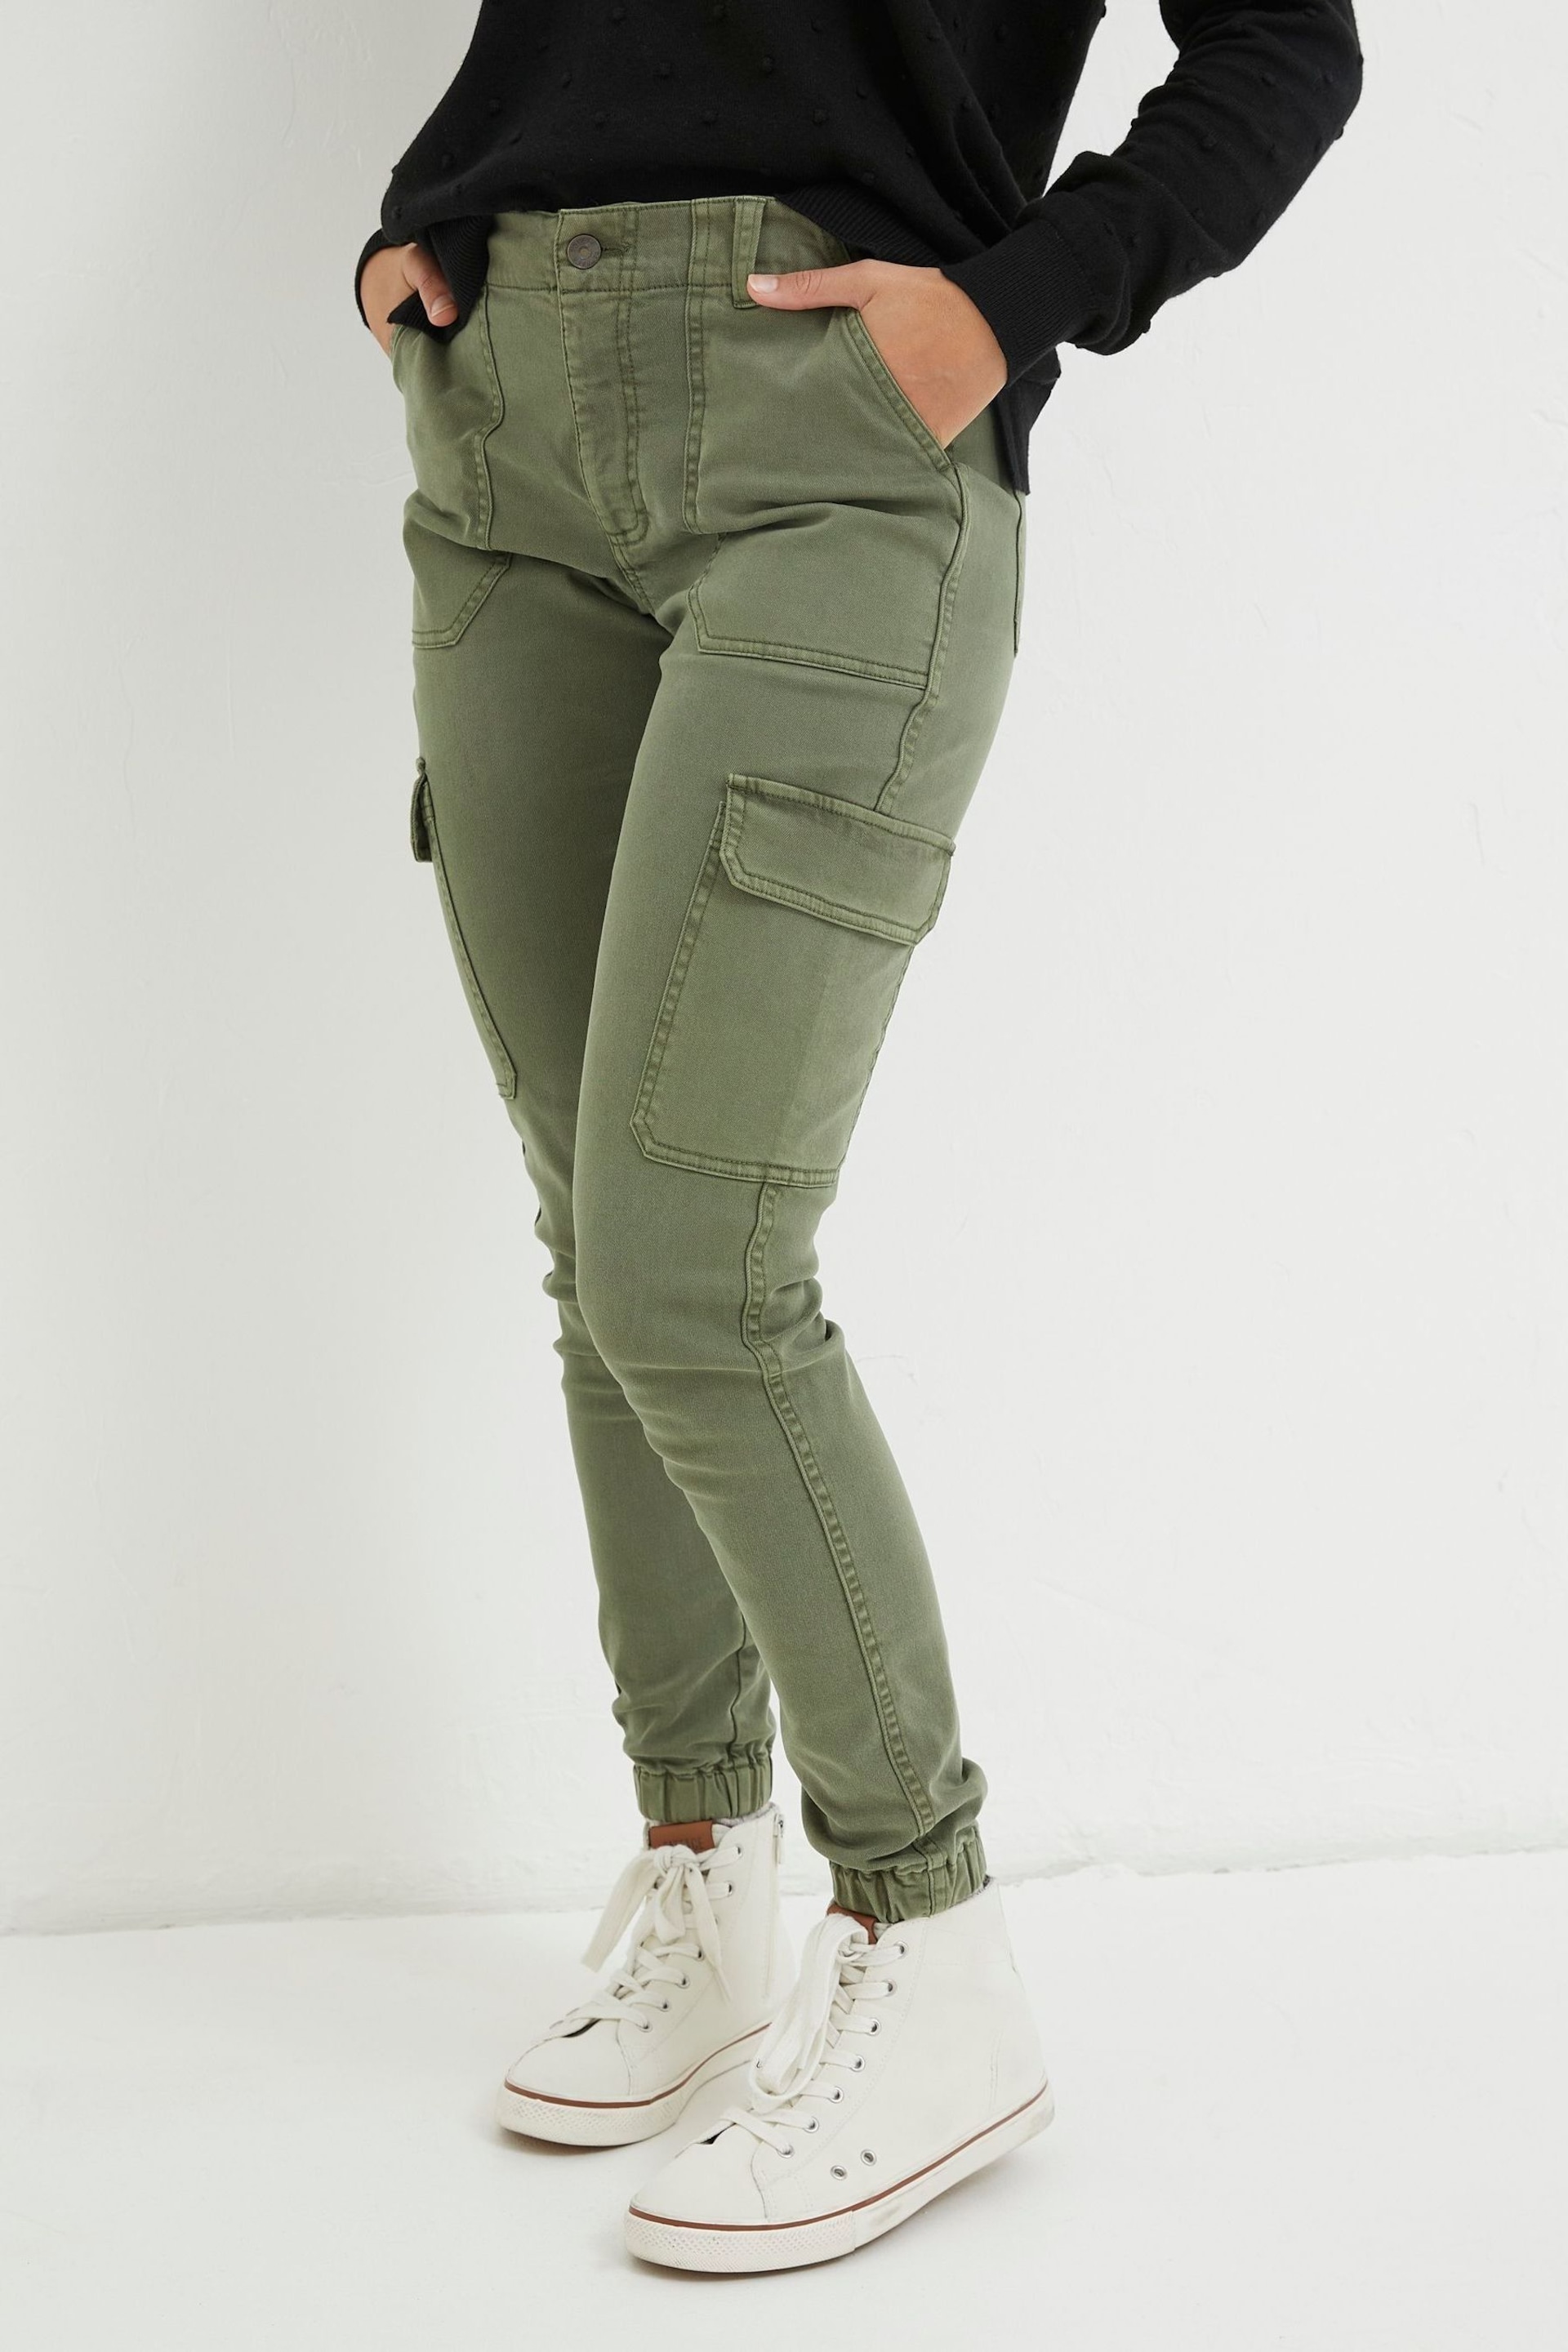 FatFace Green Cargo Trousers - Image 1 of 6